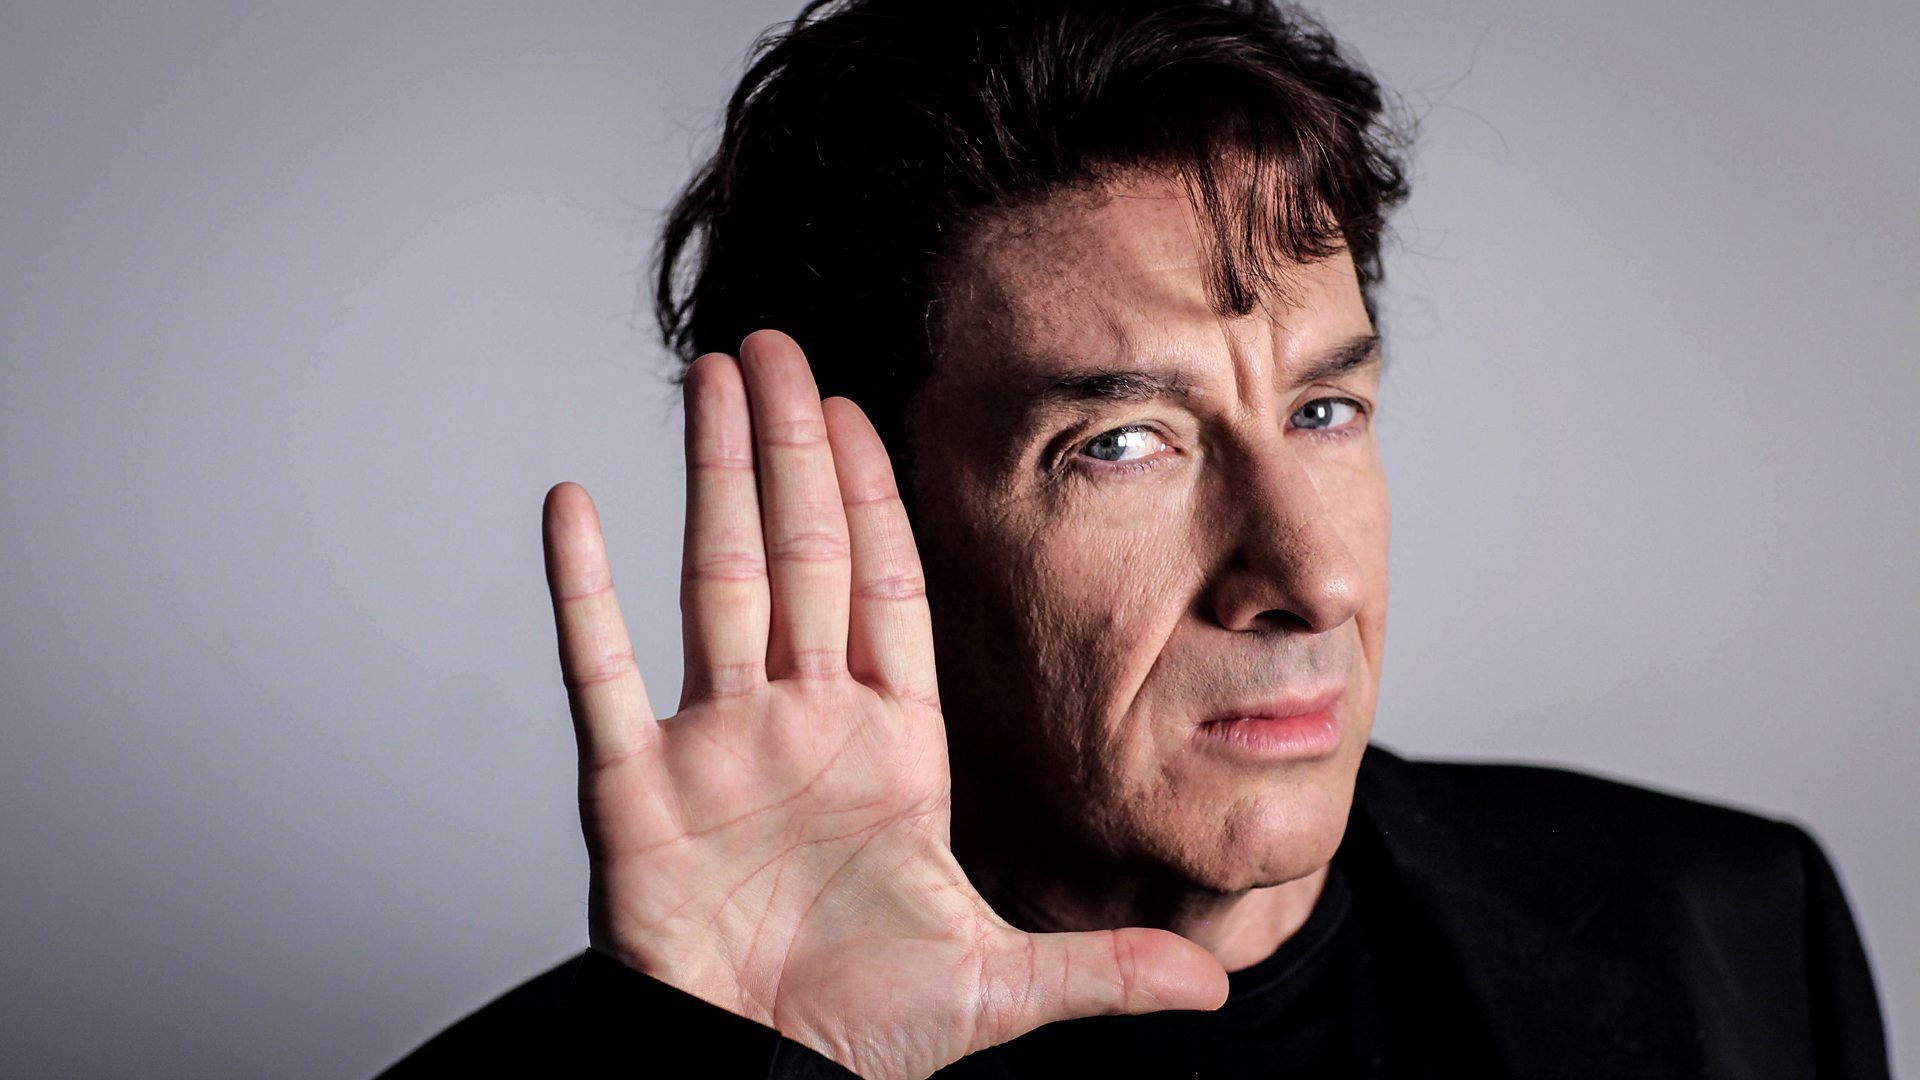 The Life of Rock with Brian Pern background